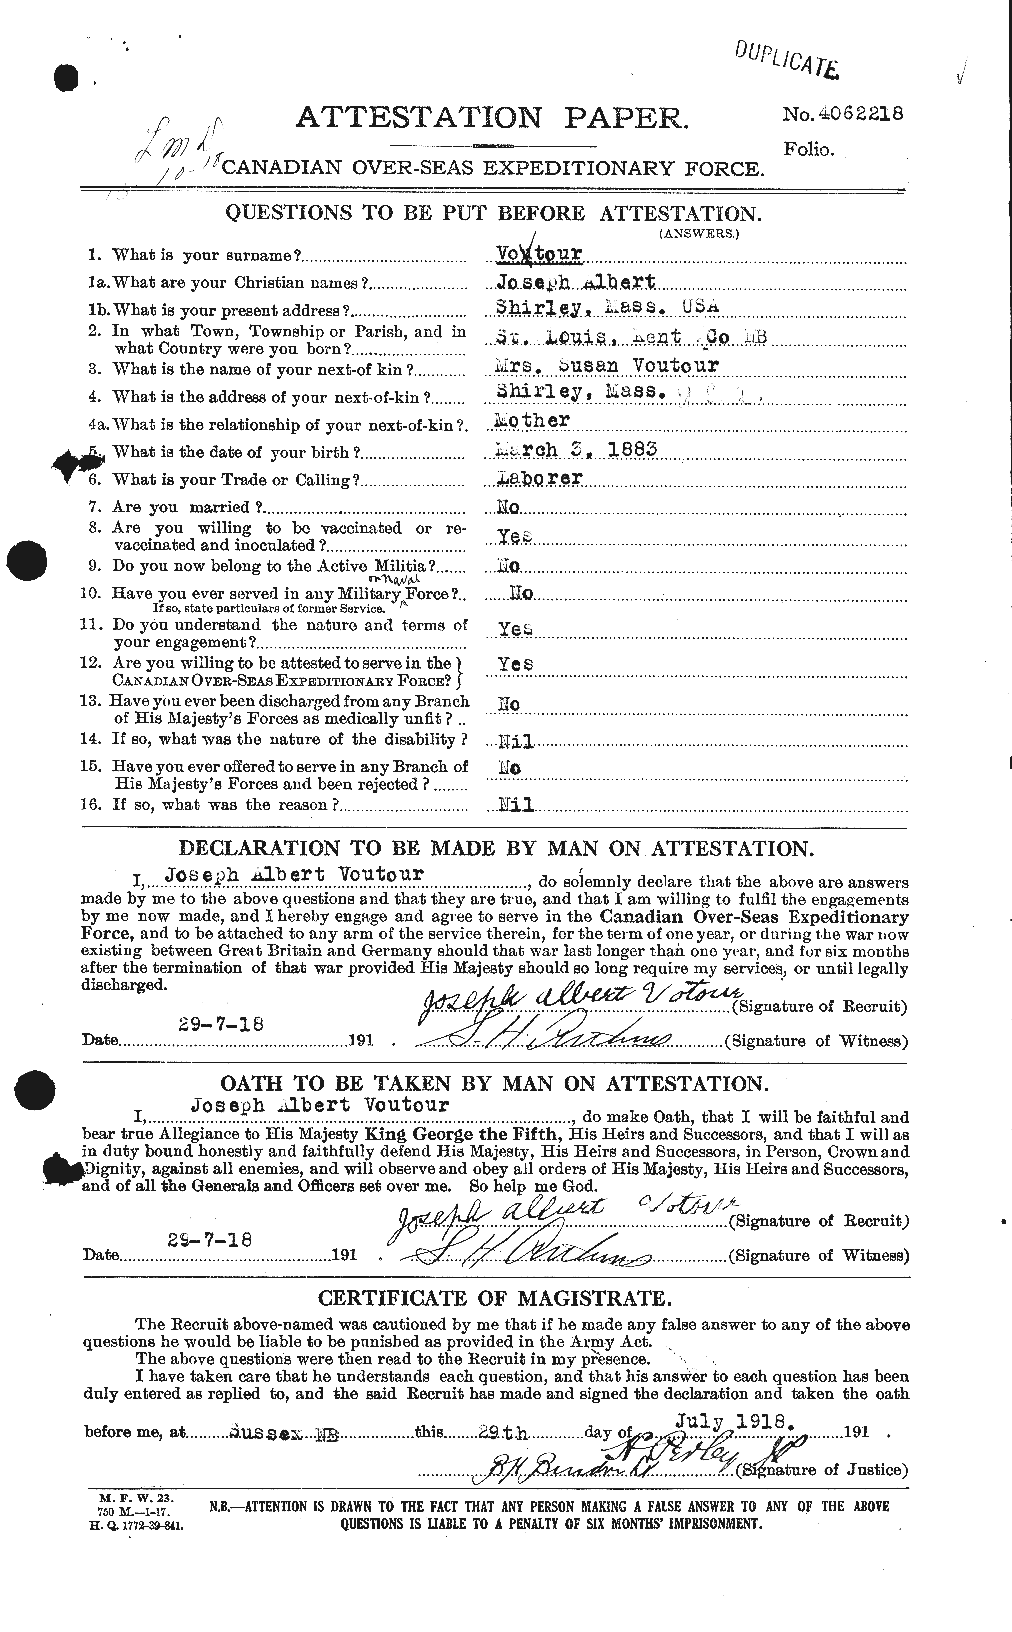 Personnel Records of the First World War - CEF 652436a